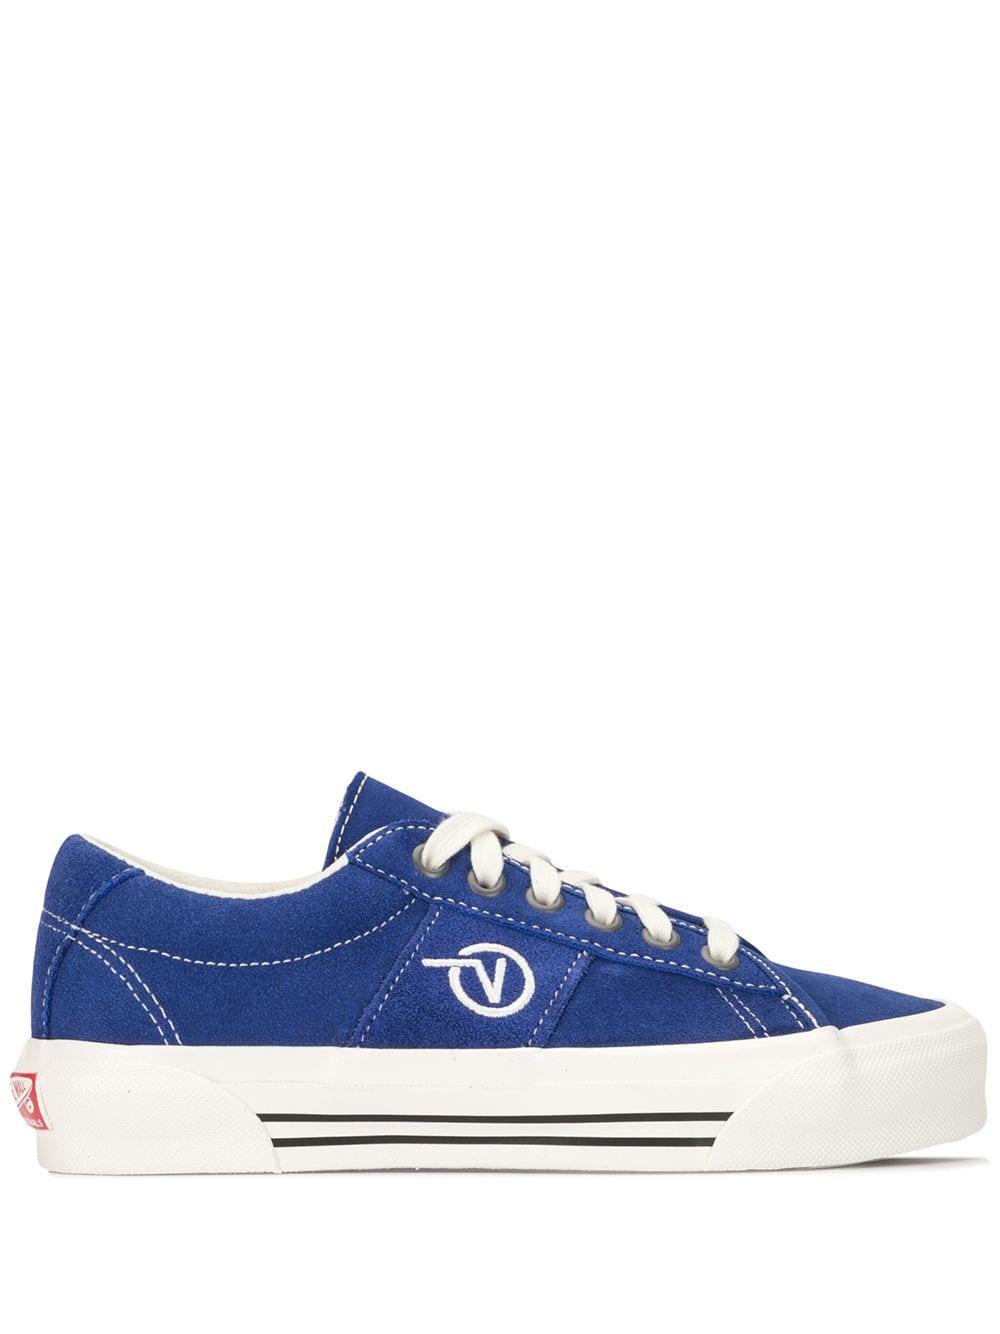 Vans Leather Thick Sole Sneakers in 